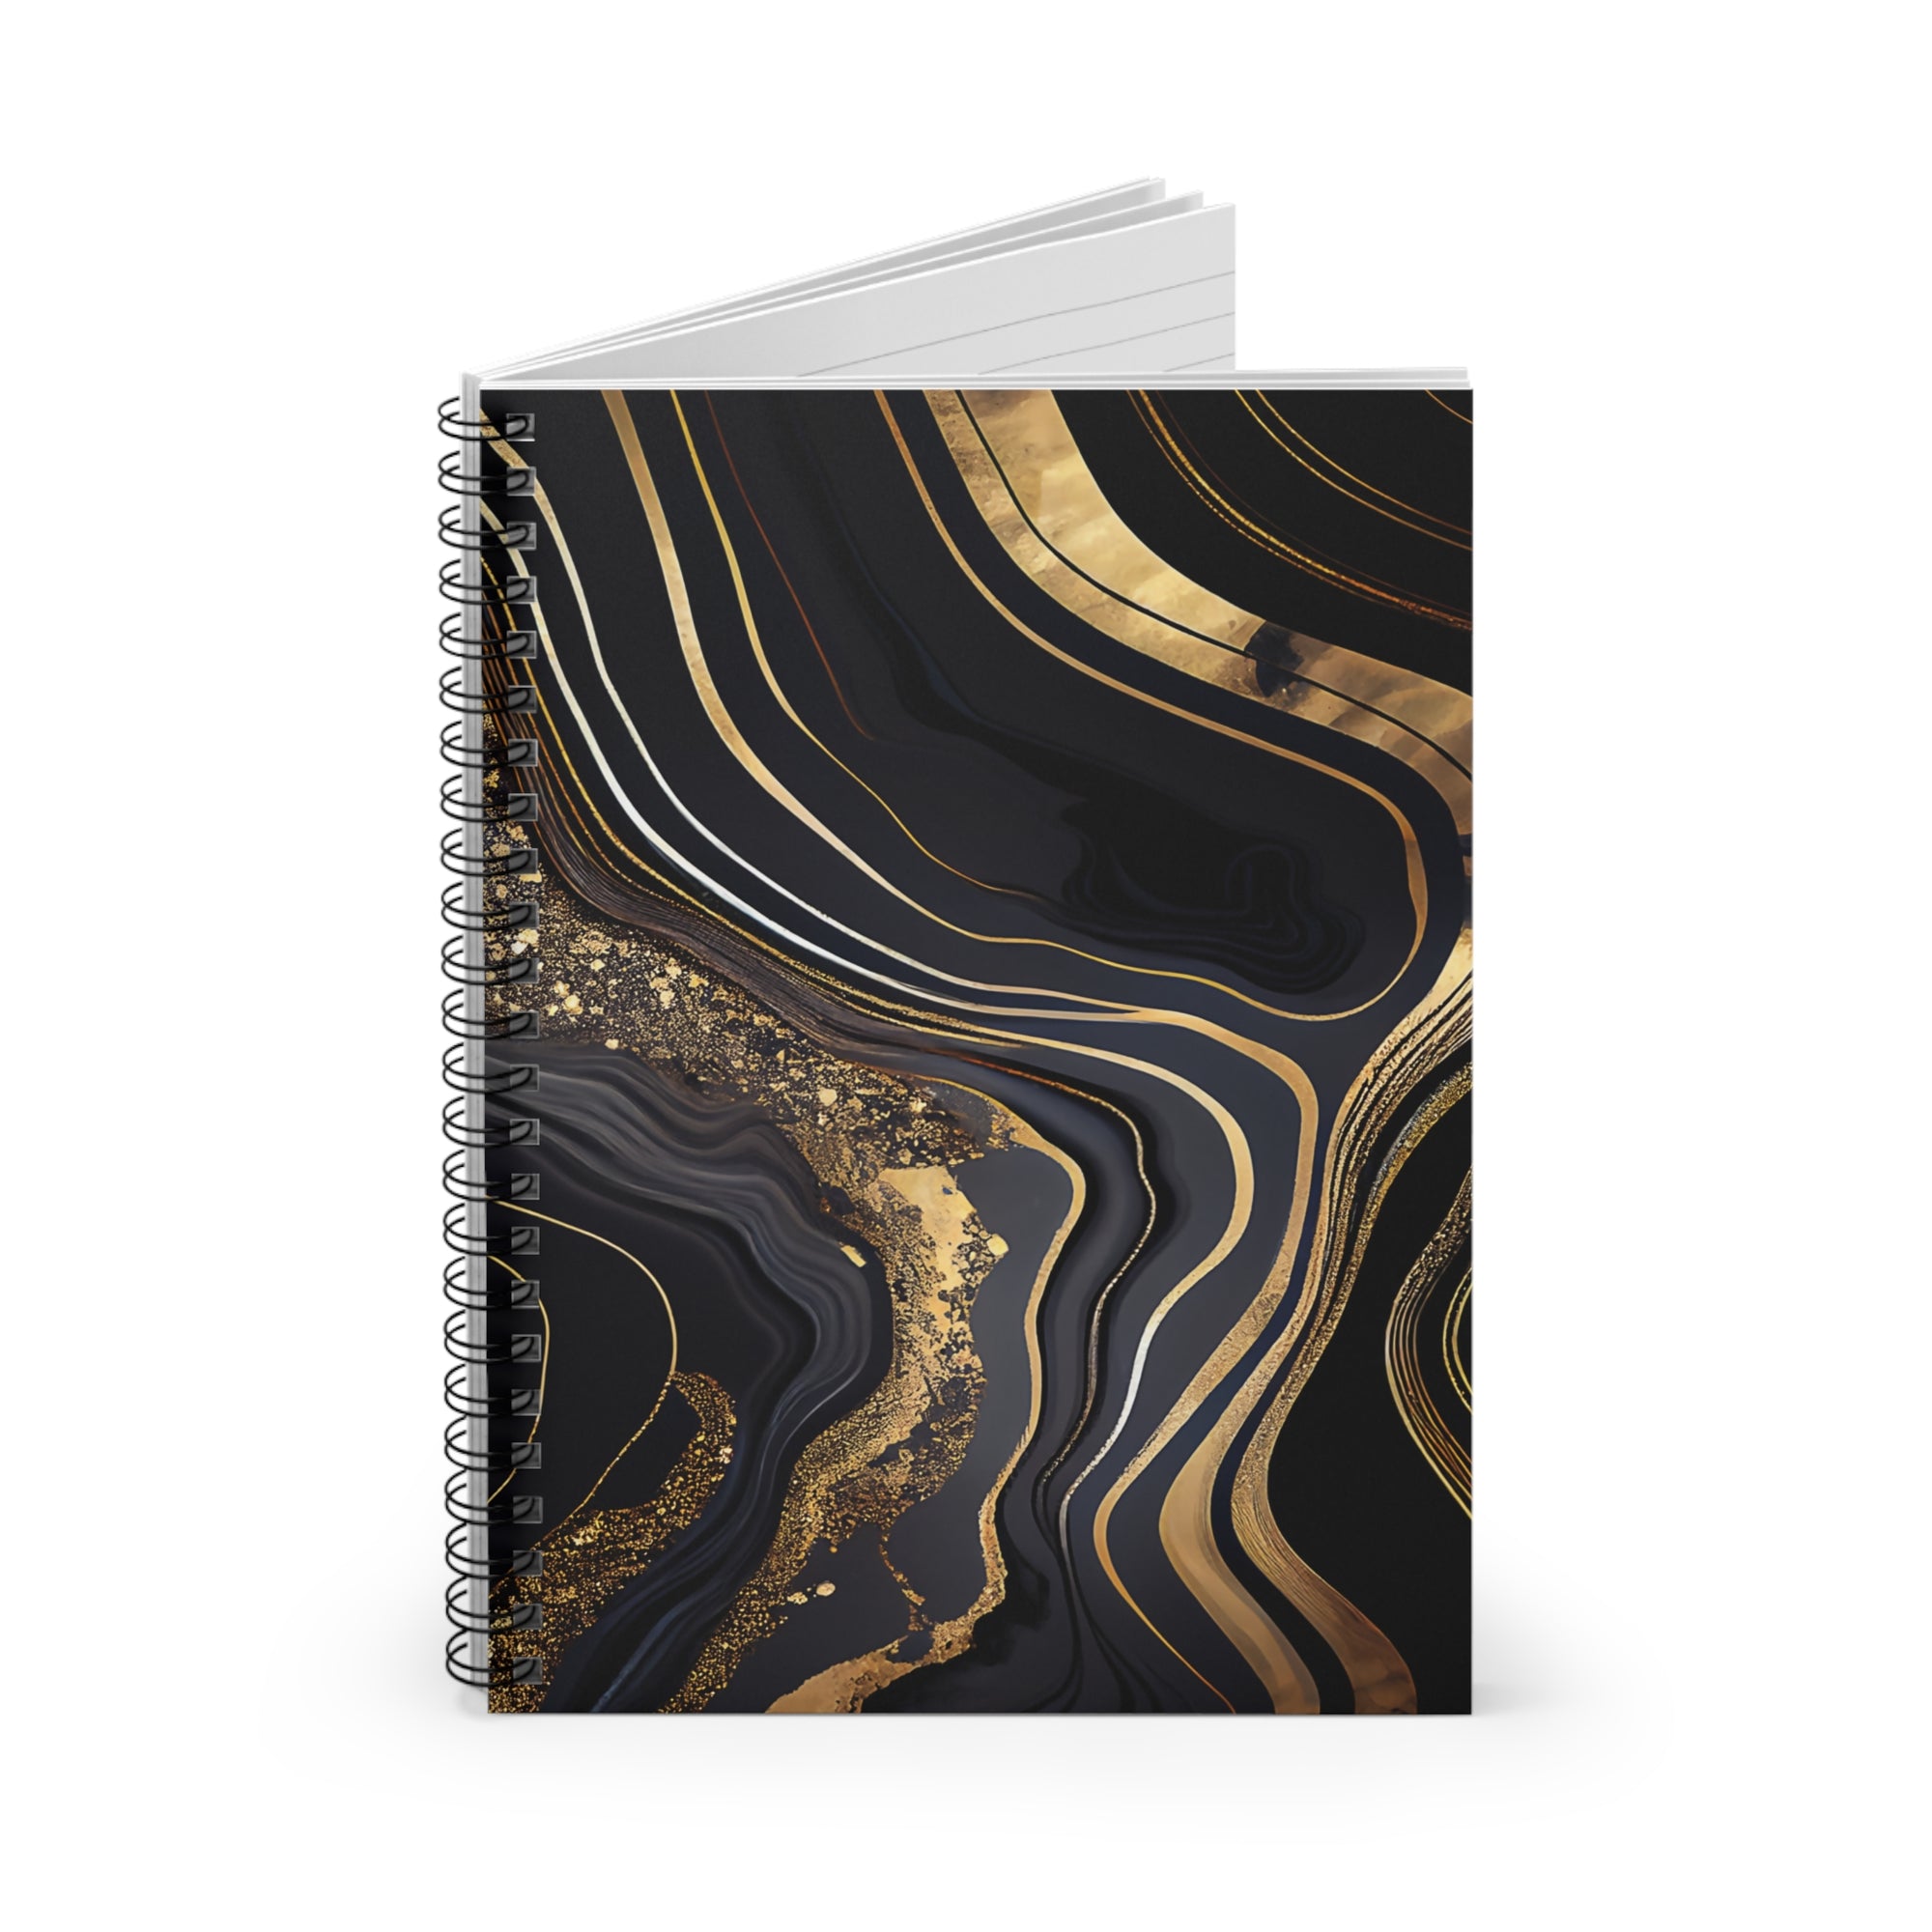 Spiral Notebook Black and gold marble design